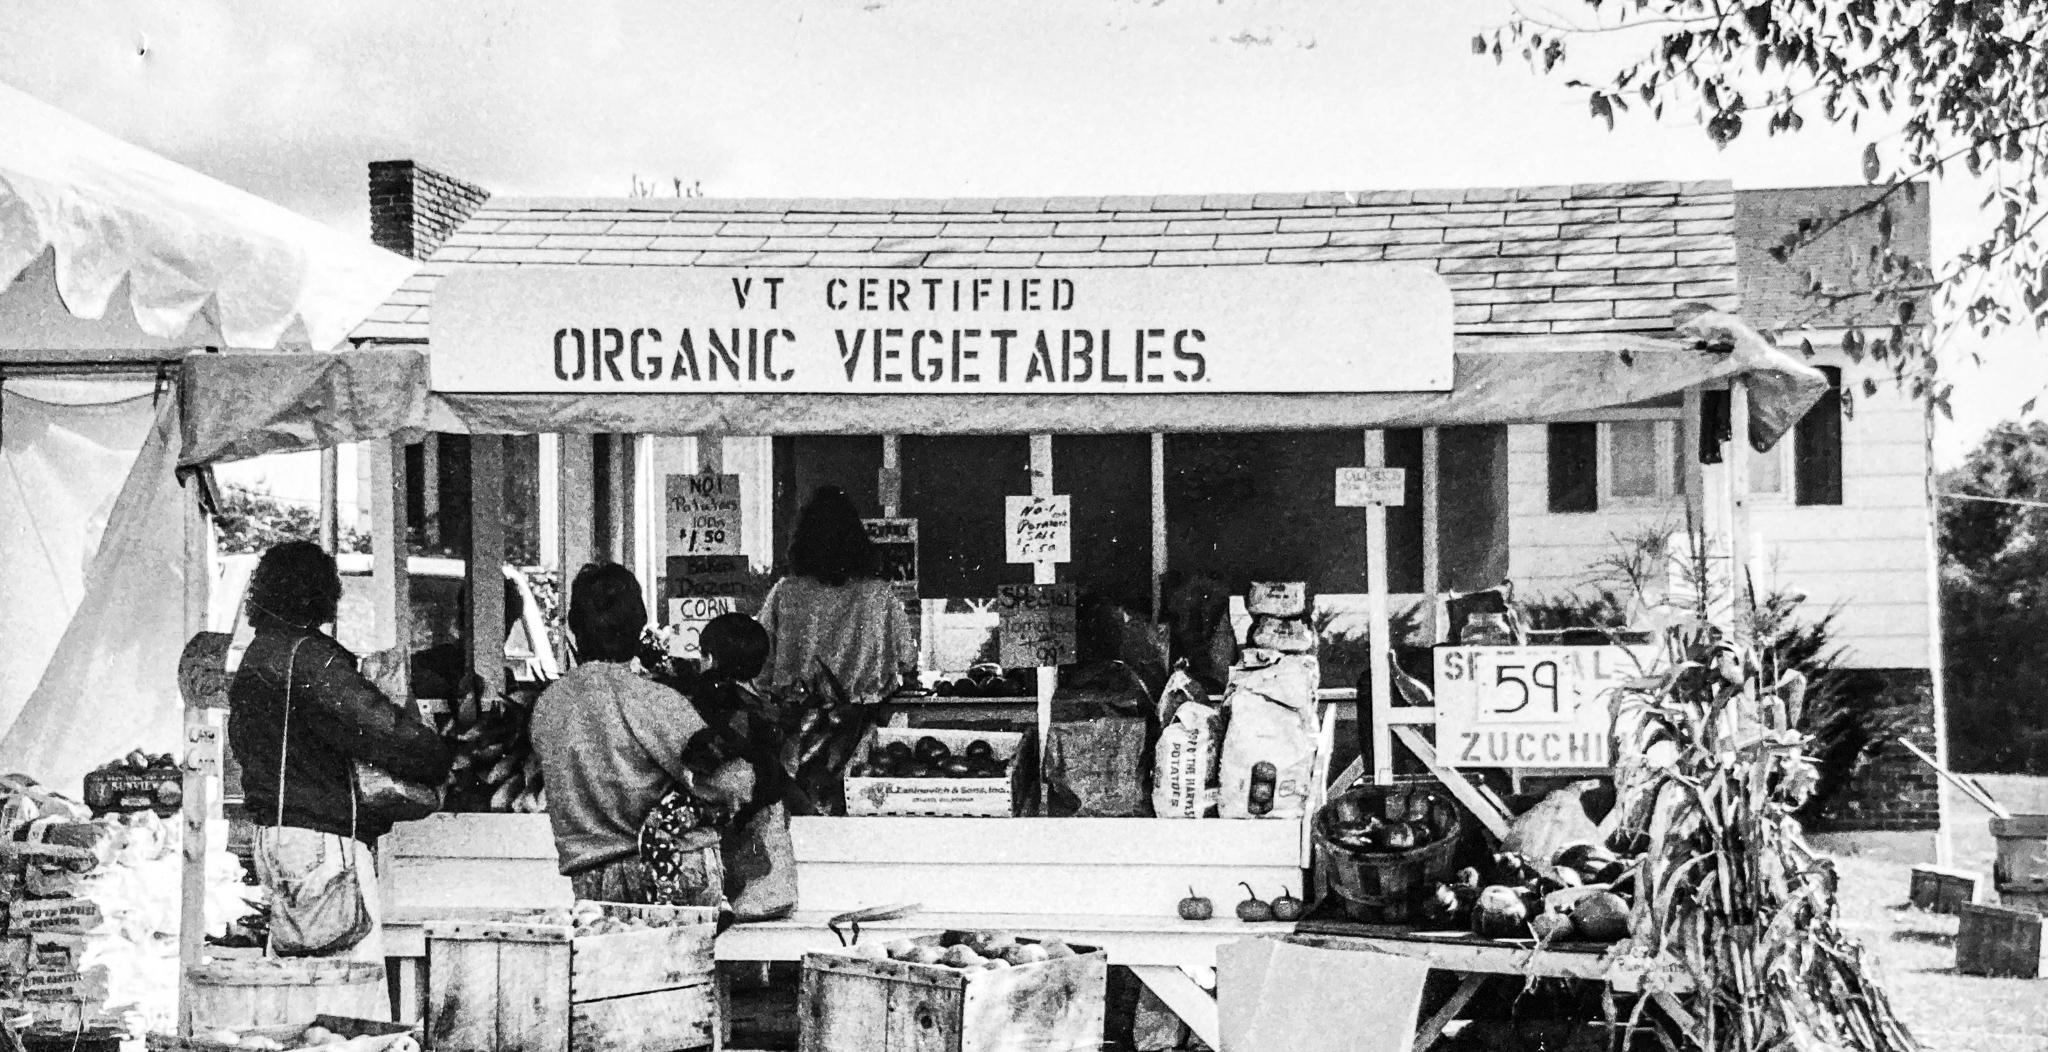 Black and white photo of people standing at a farm stand. The farm stand has a hand-stenciled sign above it that reads "VT Certified Organic Vegetables".